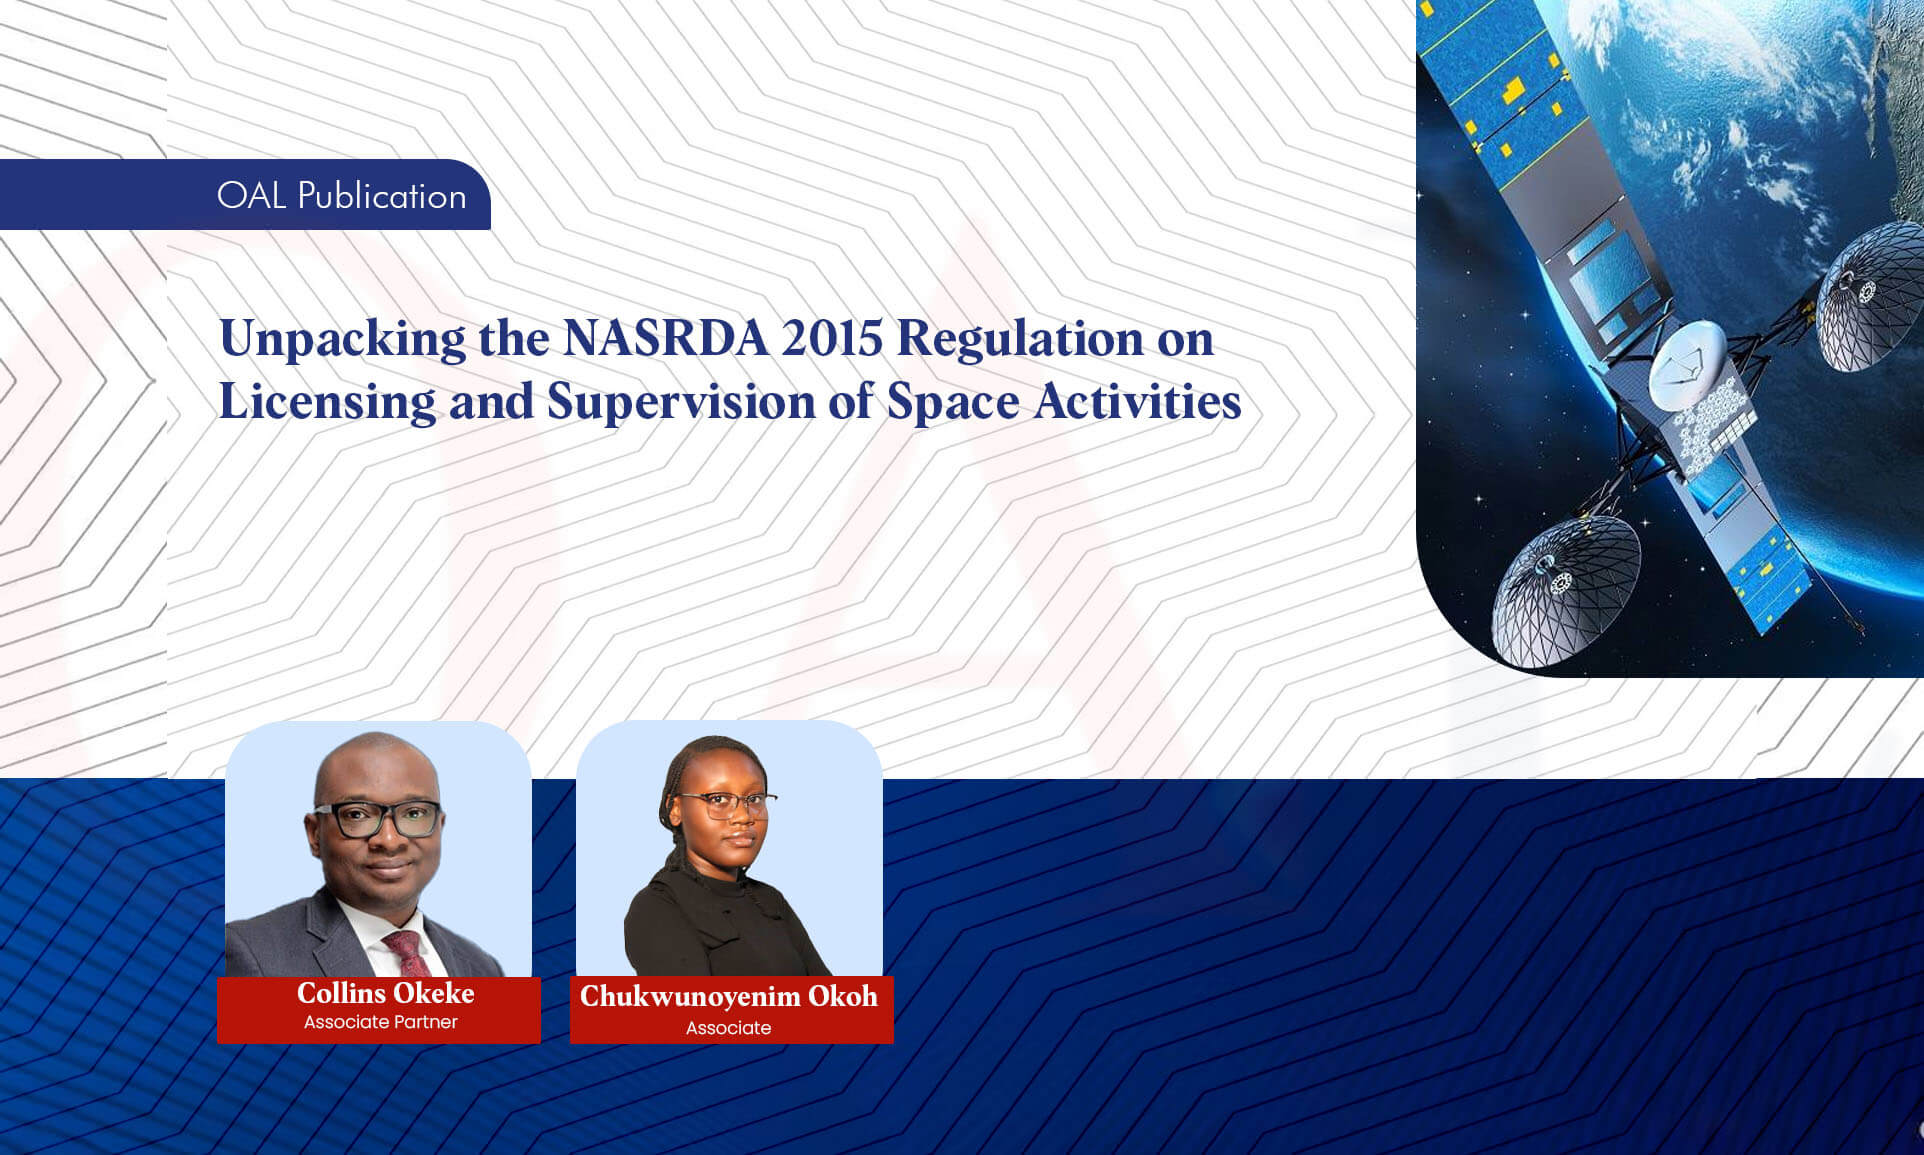 Unpacking the NASRDA 2015 Regulation on Licensing and Supervision of Space Activities